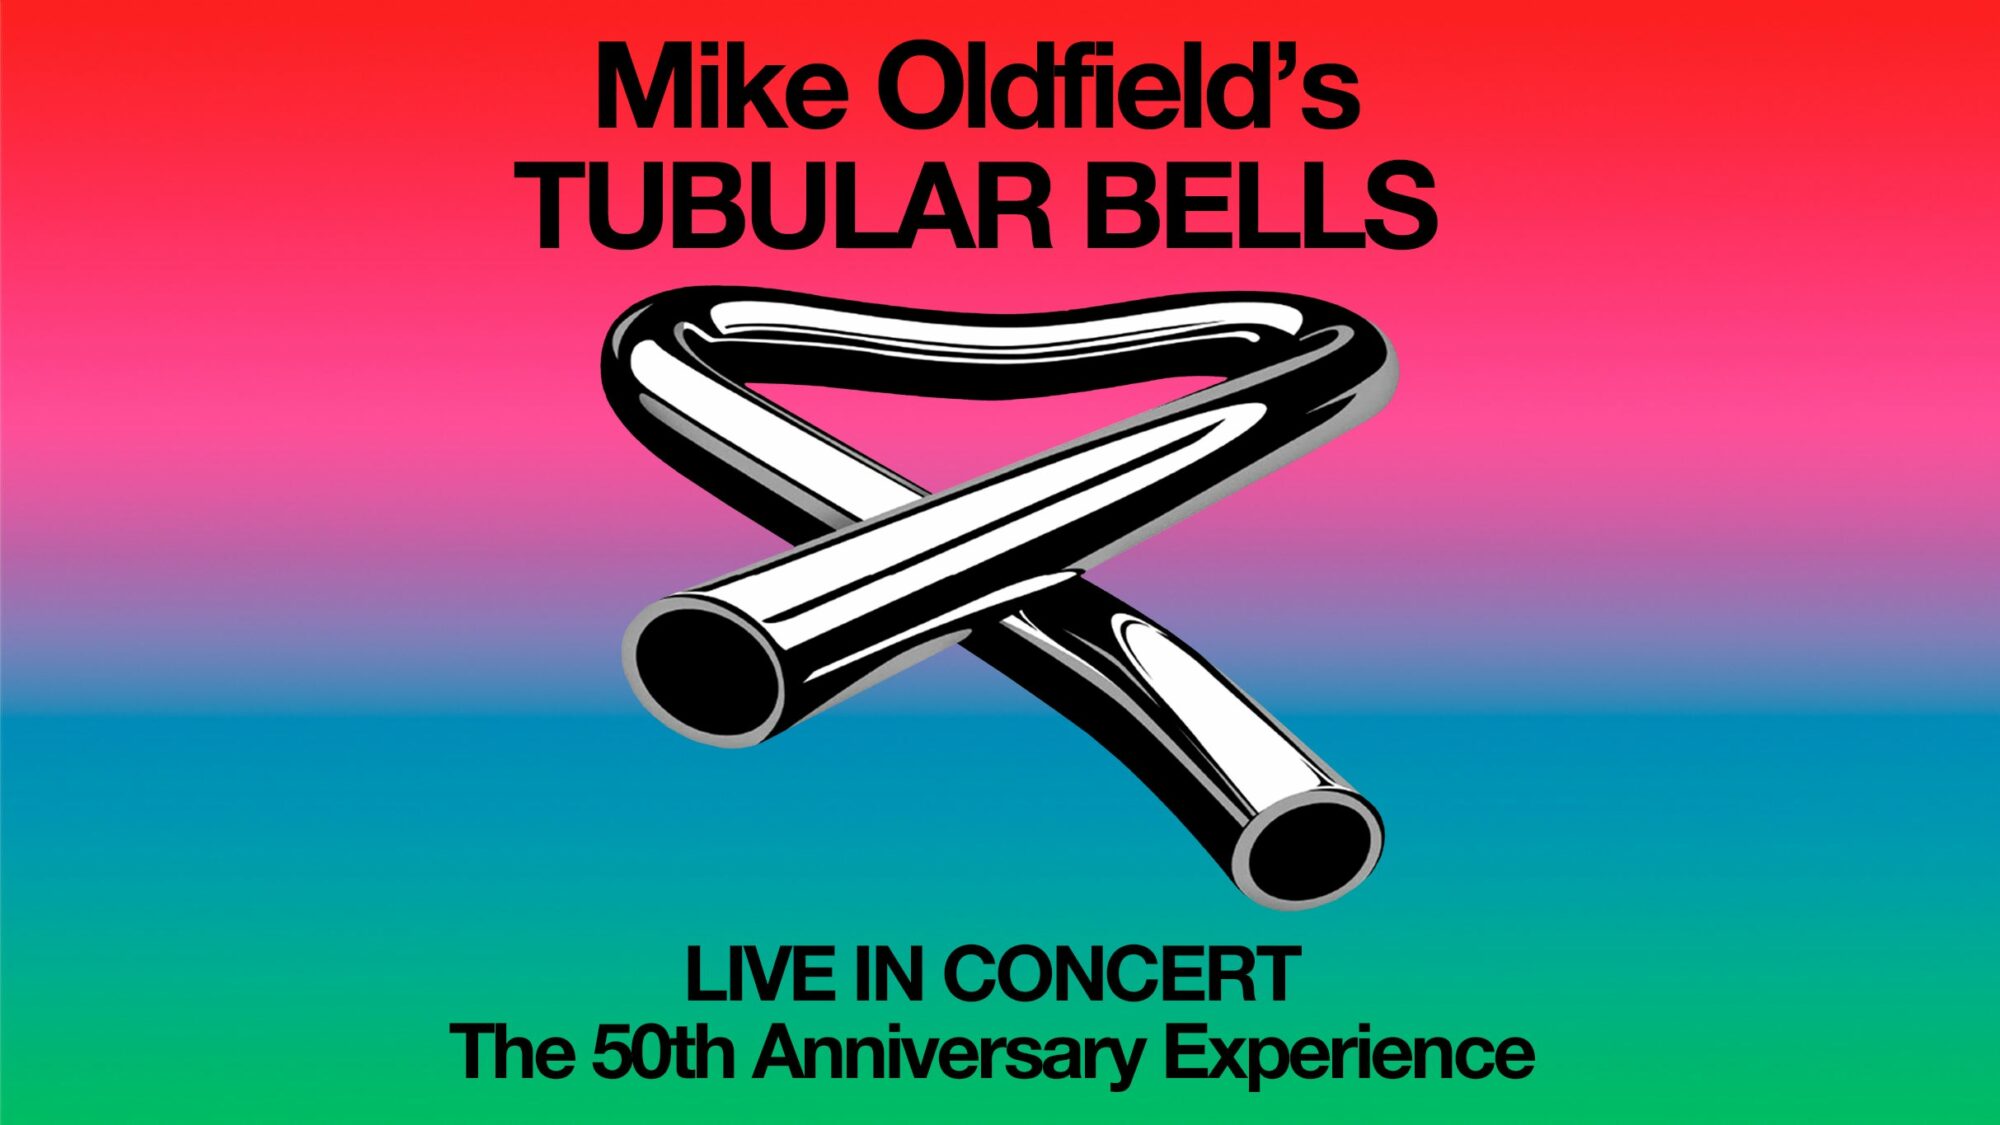 Image name Mike Oldfields Tubular Bells 50th Anniversary Tour at Sheffield City Hall Oval Hall Sheffield the 23 image from the post Mike Oldfield's Tubular Bells: 50th Anniversary Tour at Sheffield City Hall Oval Hall, Sheffield in Yorkshire.com.